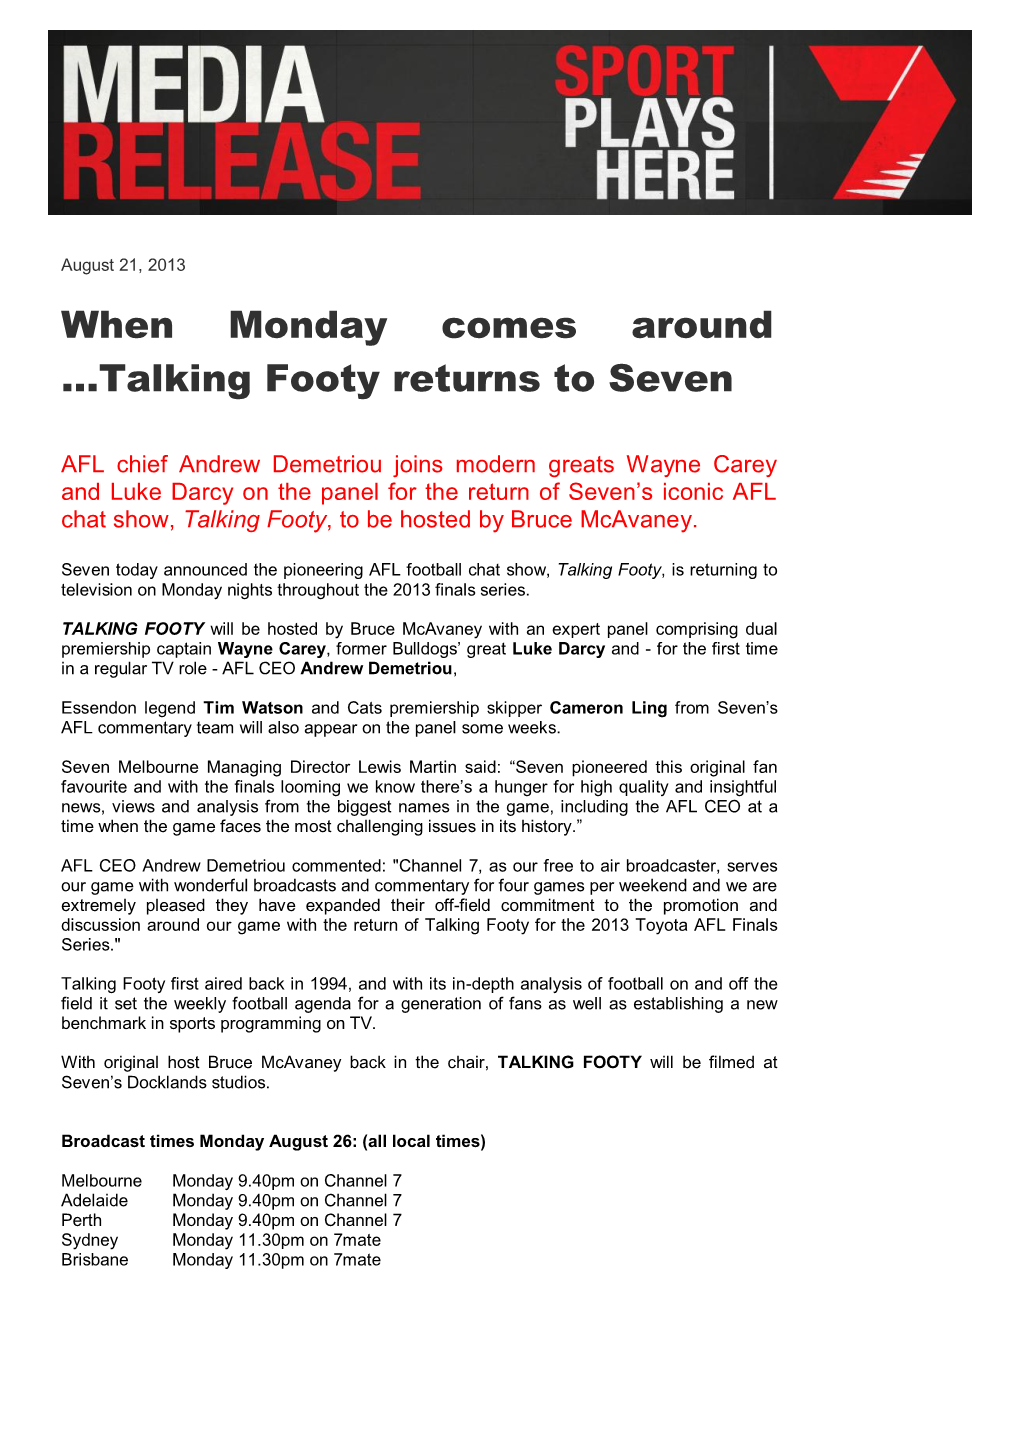 Talking Footy Returns to Seven